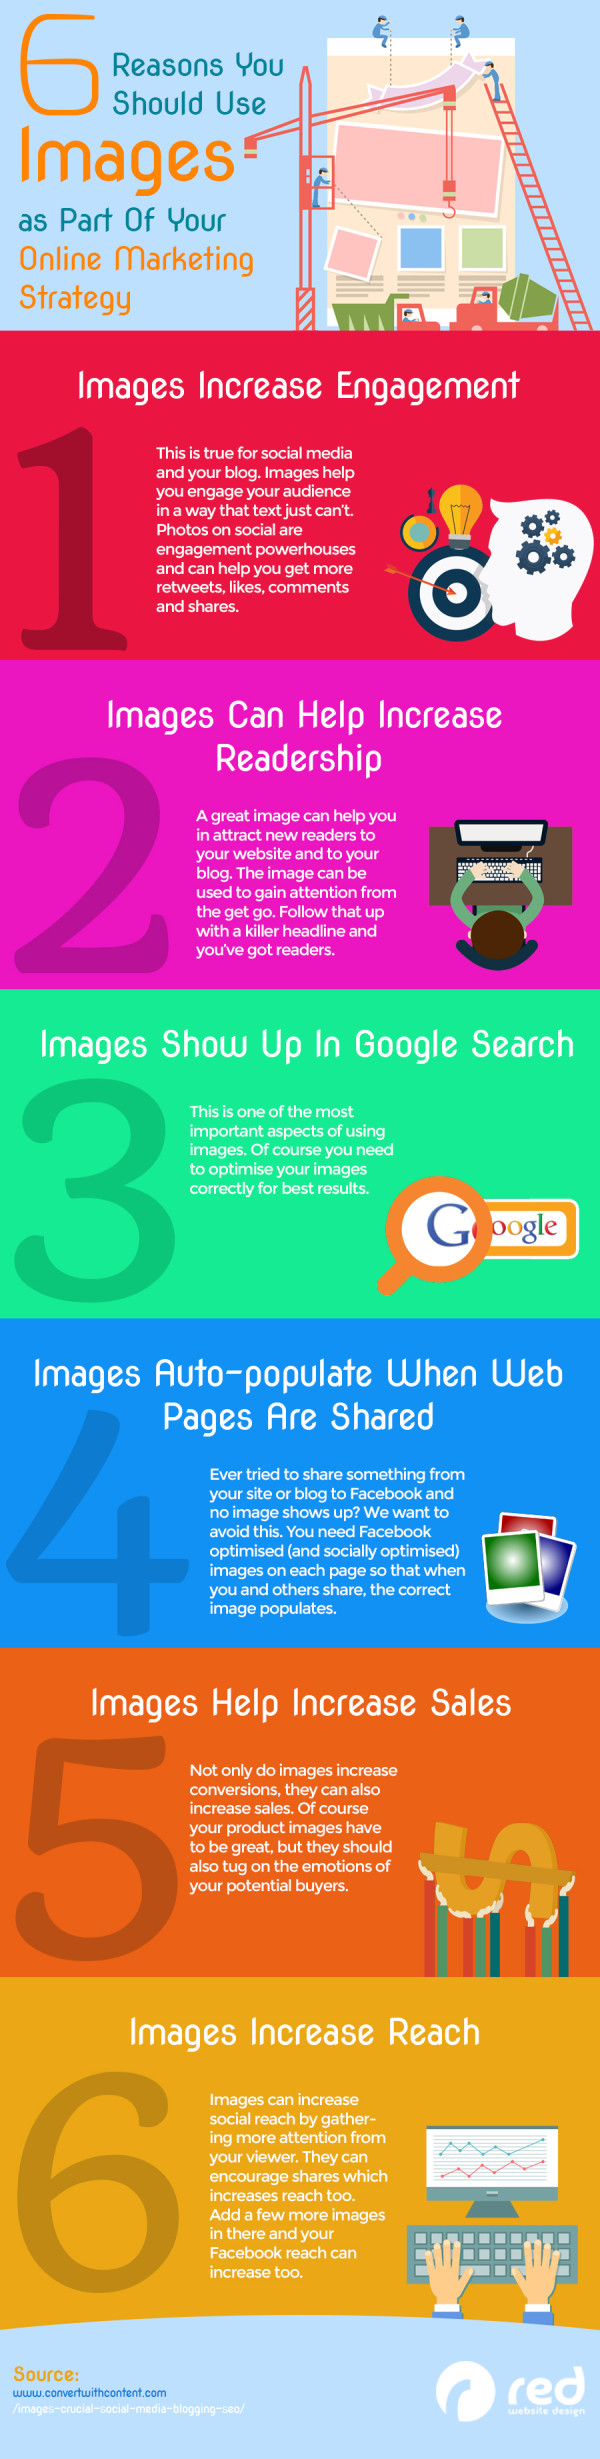 6-reasons-images-should-be-part-of-your-seo-and-social-media-strategy1 (1)